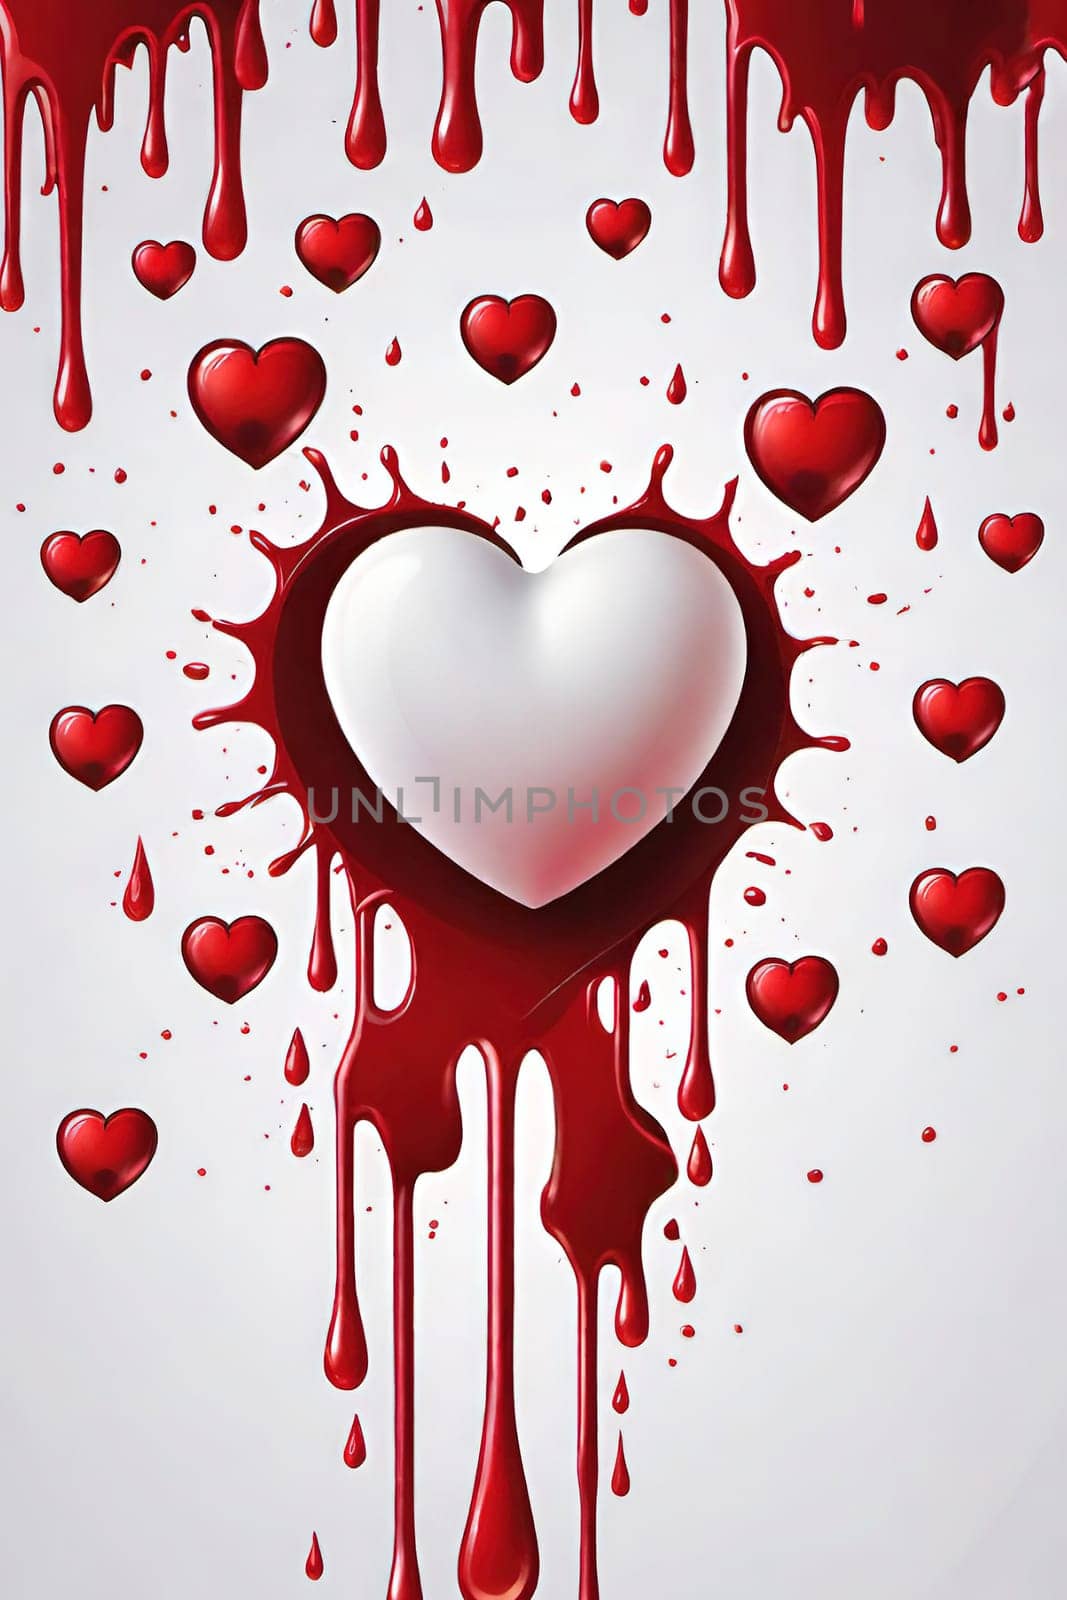 Heart with blood splashes on a gray background. by yilmazsavaskandag